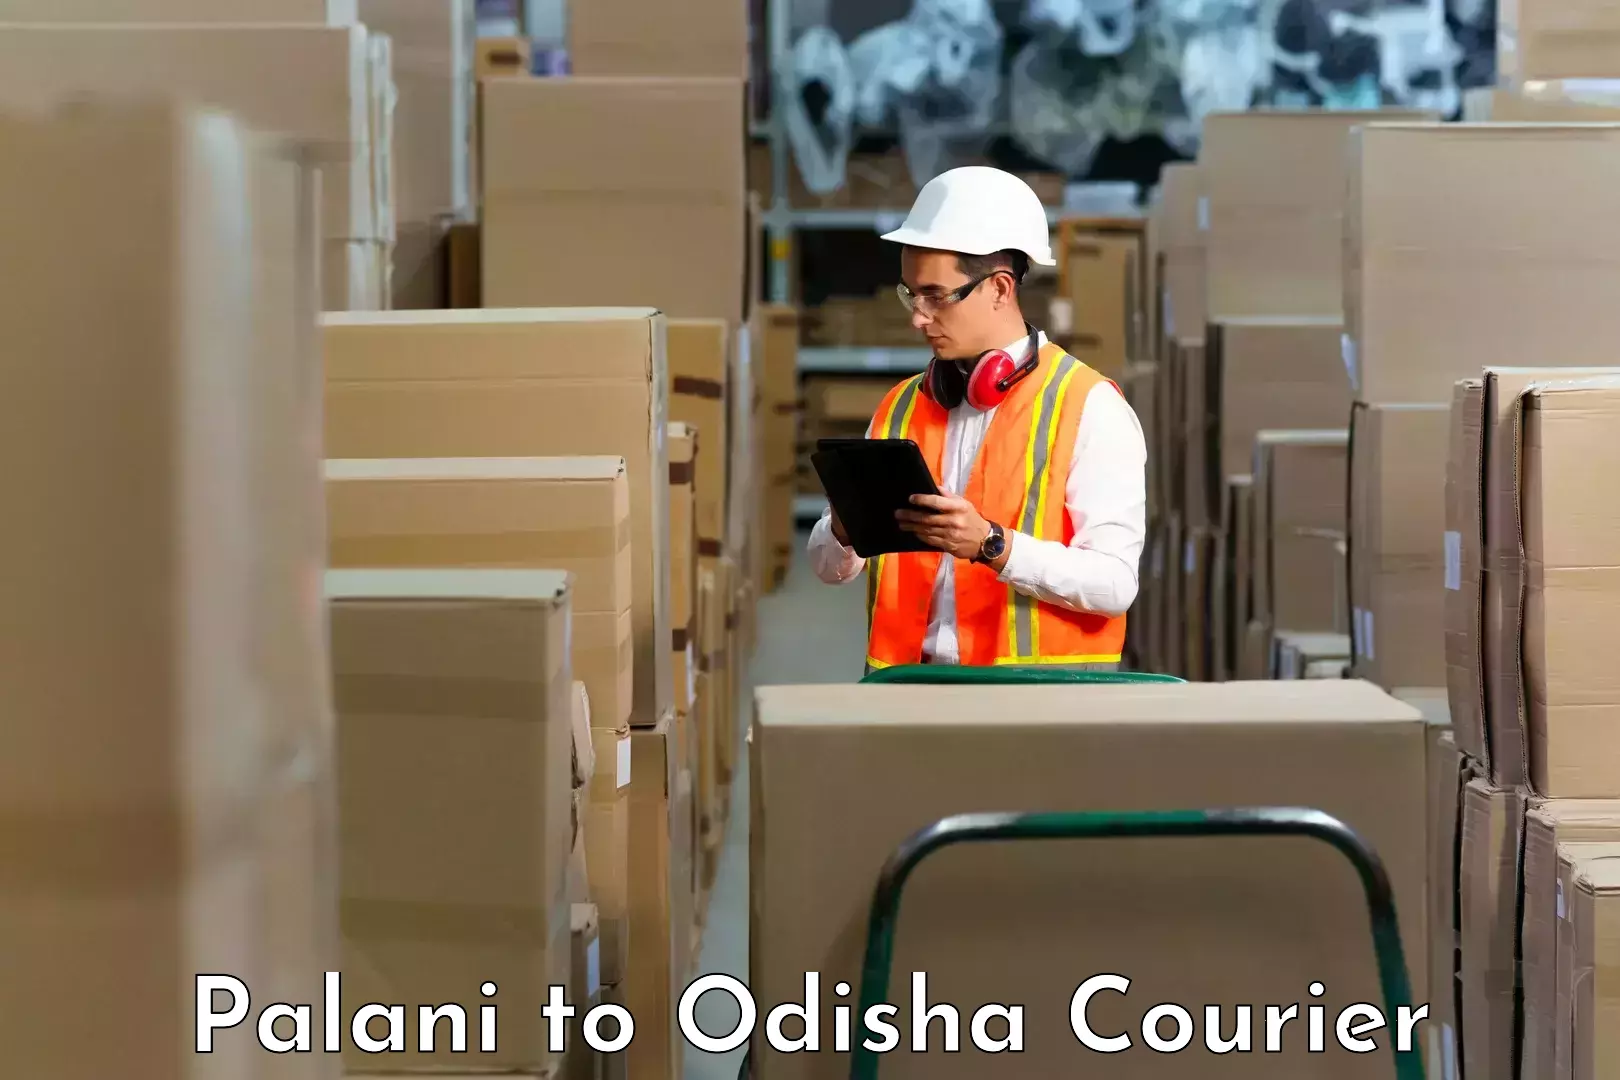 State-of-the-art courier technology Palani to Kantamal